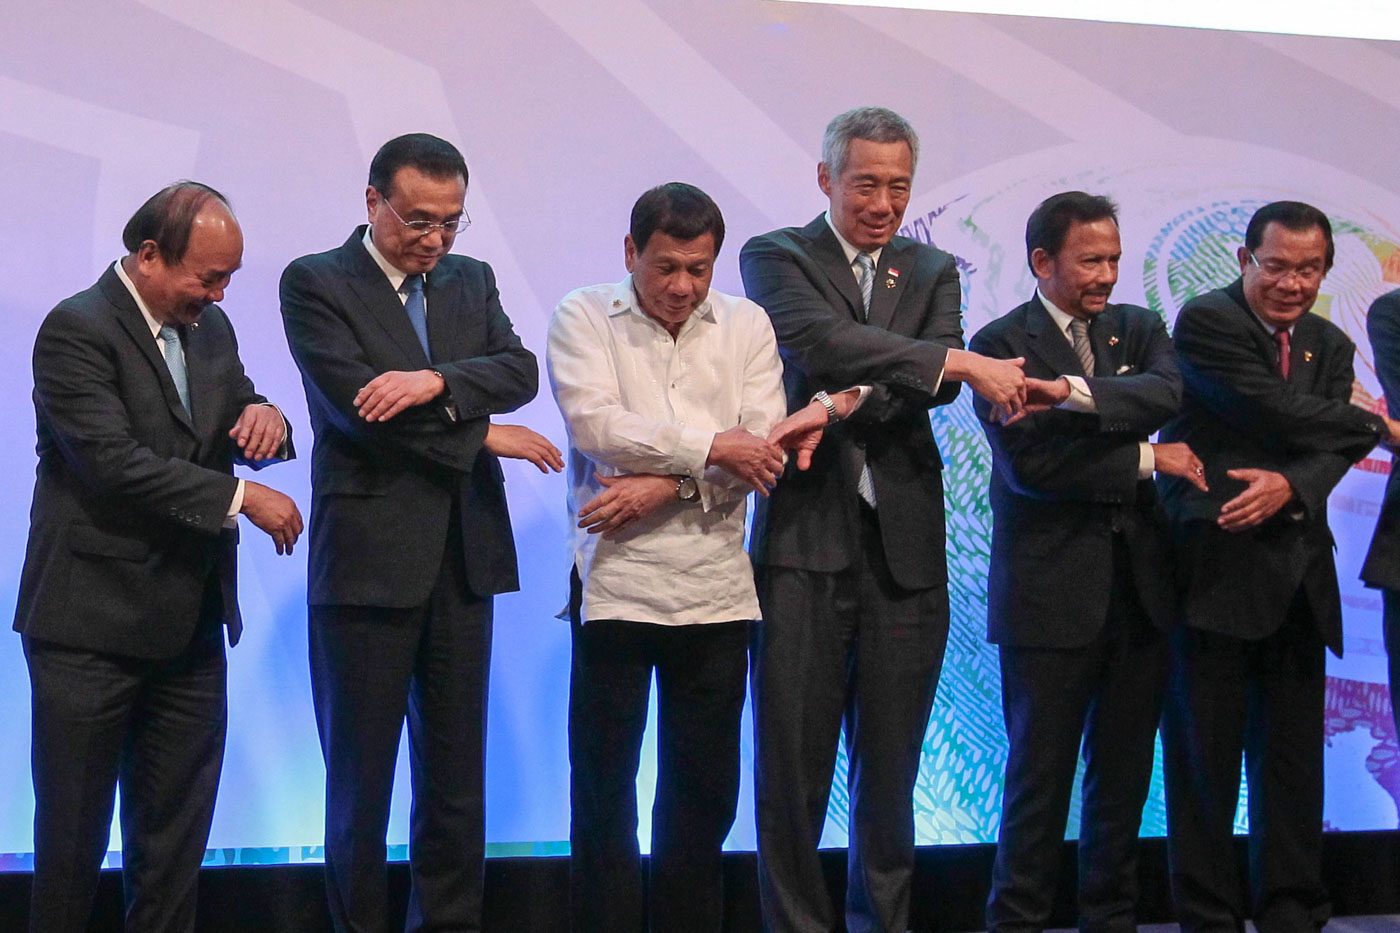 ASEAN-CHINA TIES. ASEAN leaders and Chinese Premier Li Keqiang prepare to do the ASEAN handshake. Photo by Voltaire Domingo/NPPA IMAGES/POOL  